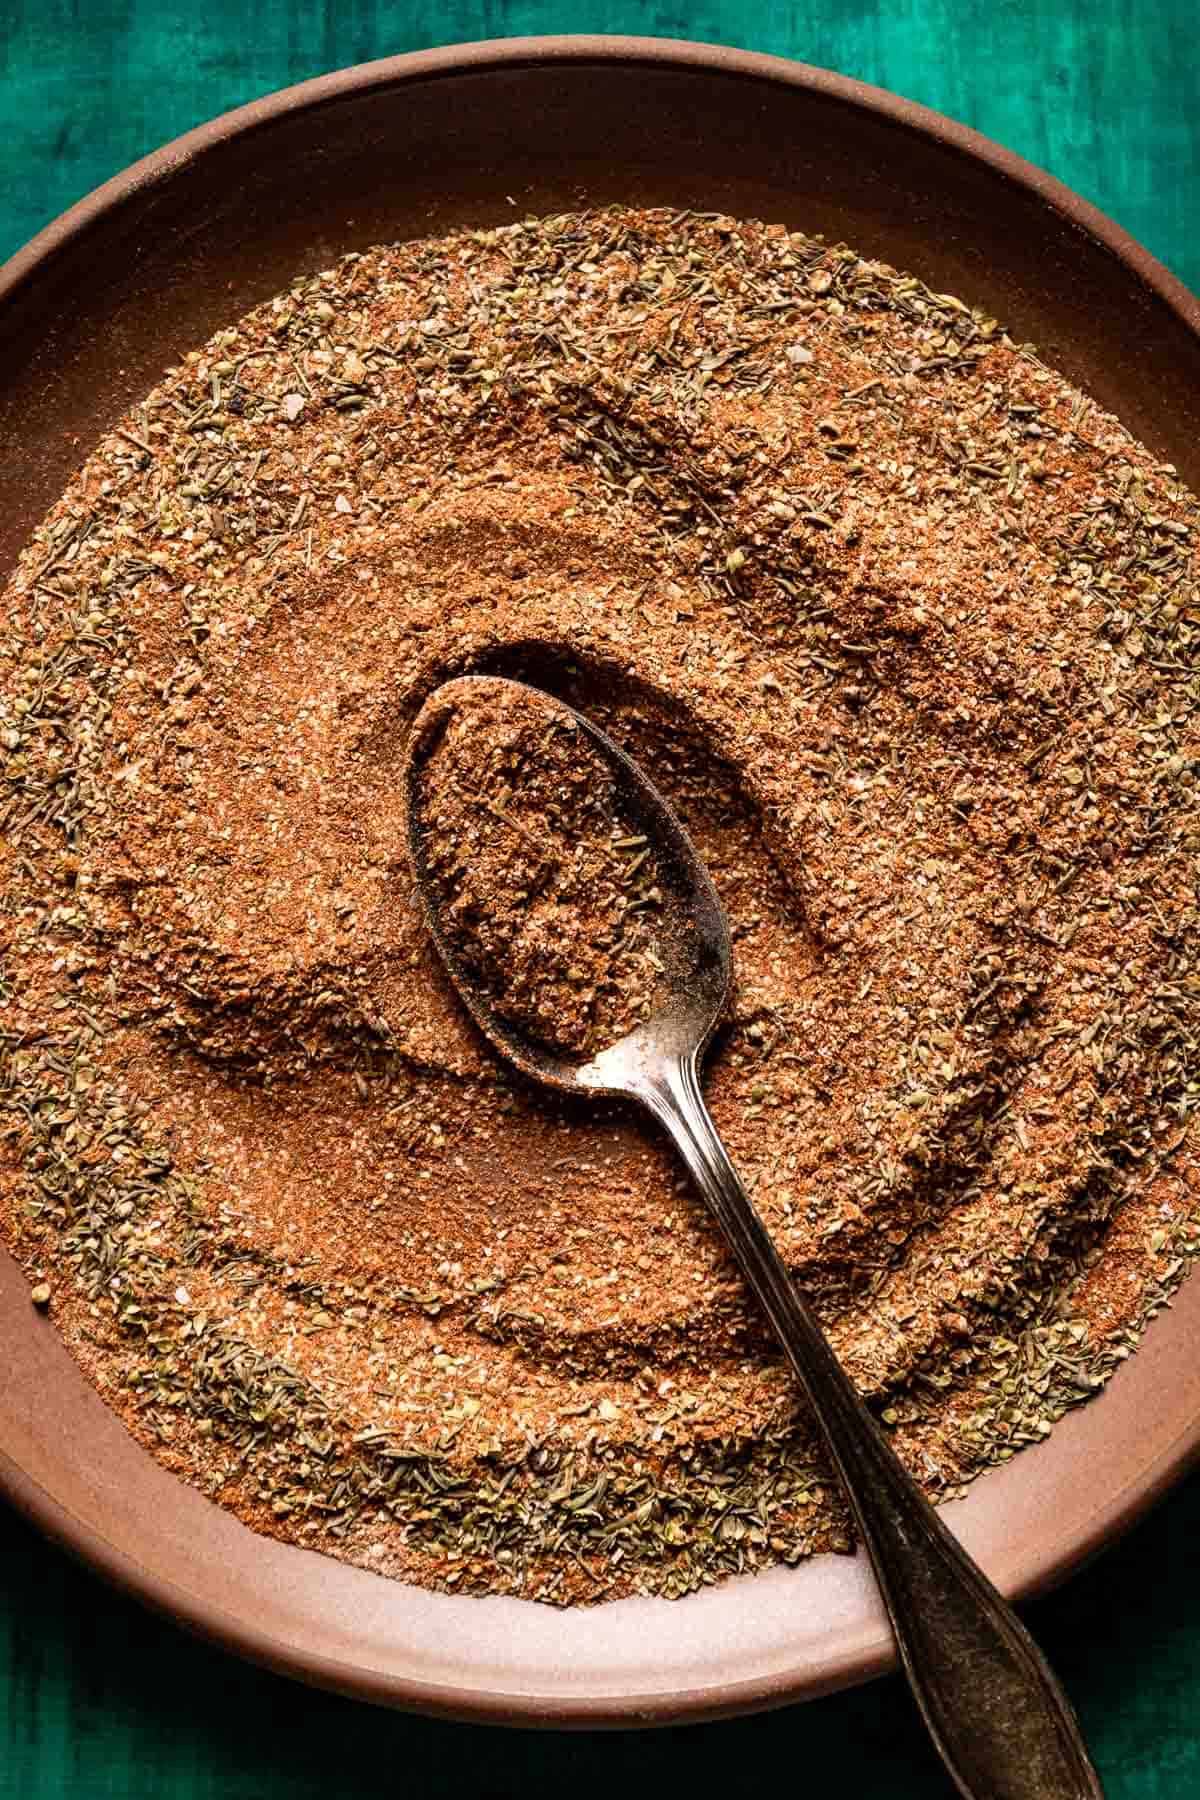 Blackened seasoning on a plate with a spoon in the middle.